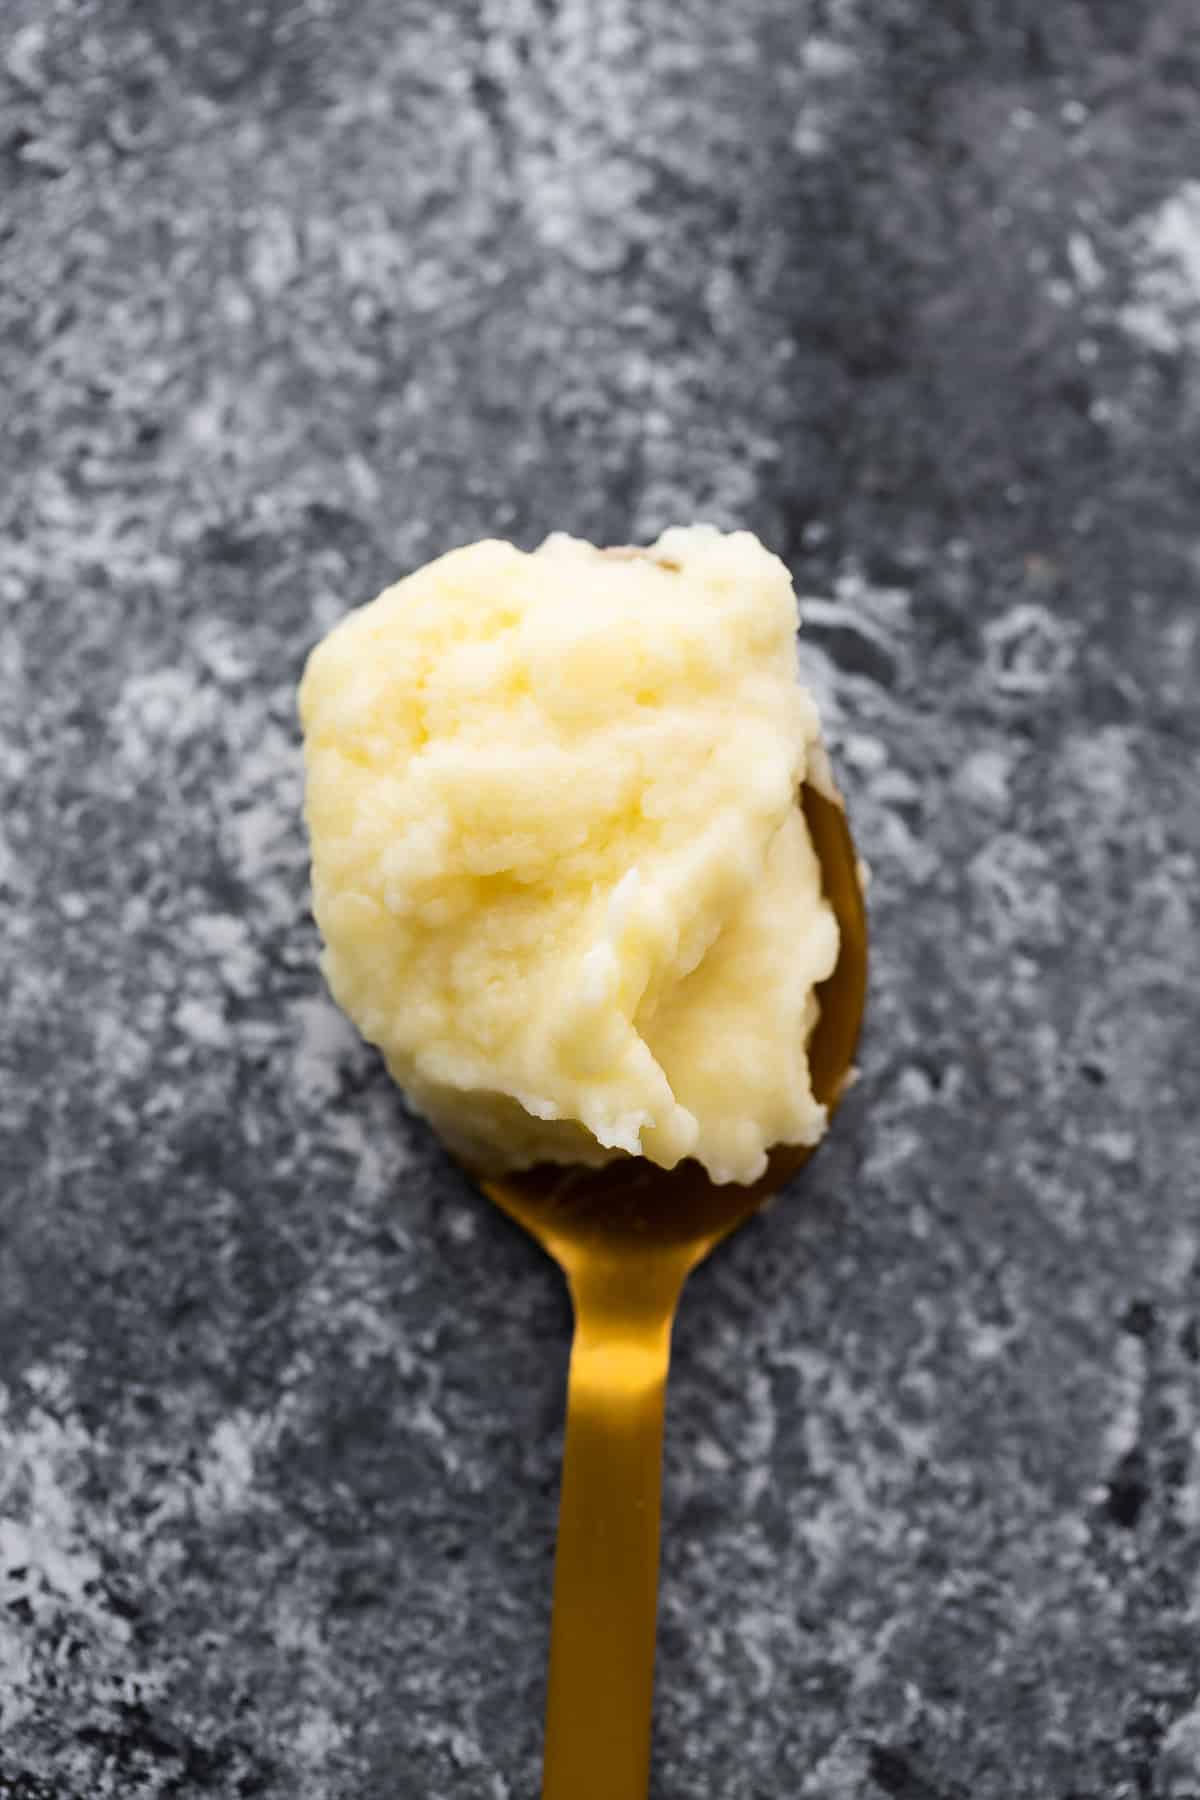 mashed potatoes on spoon